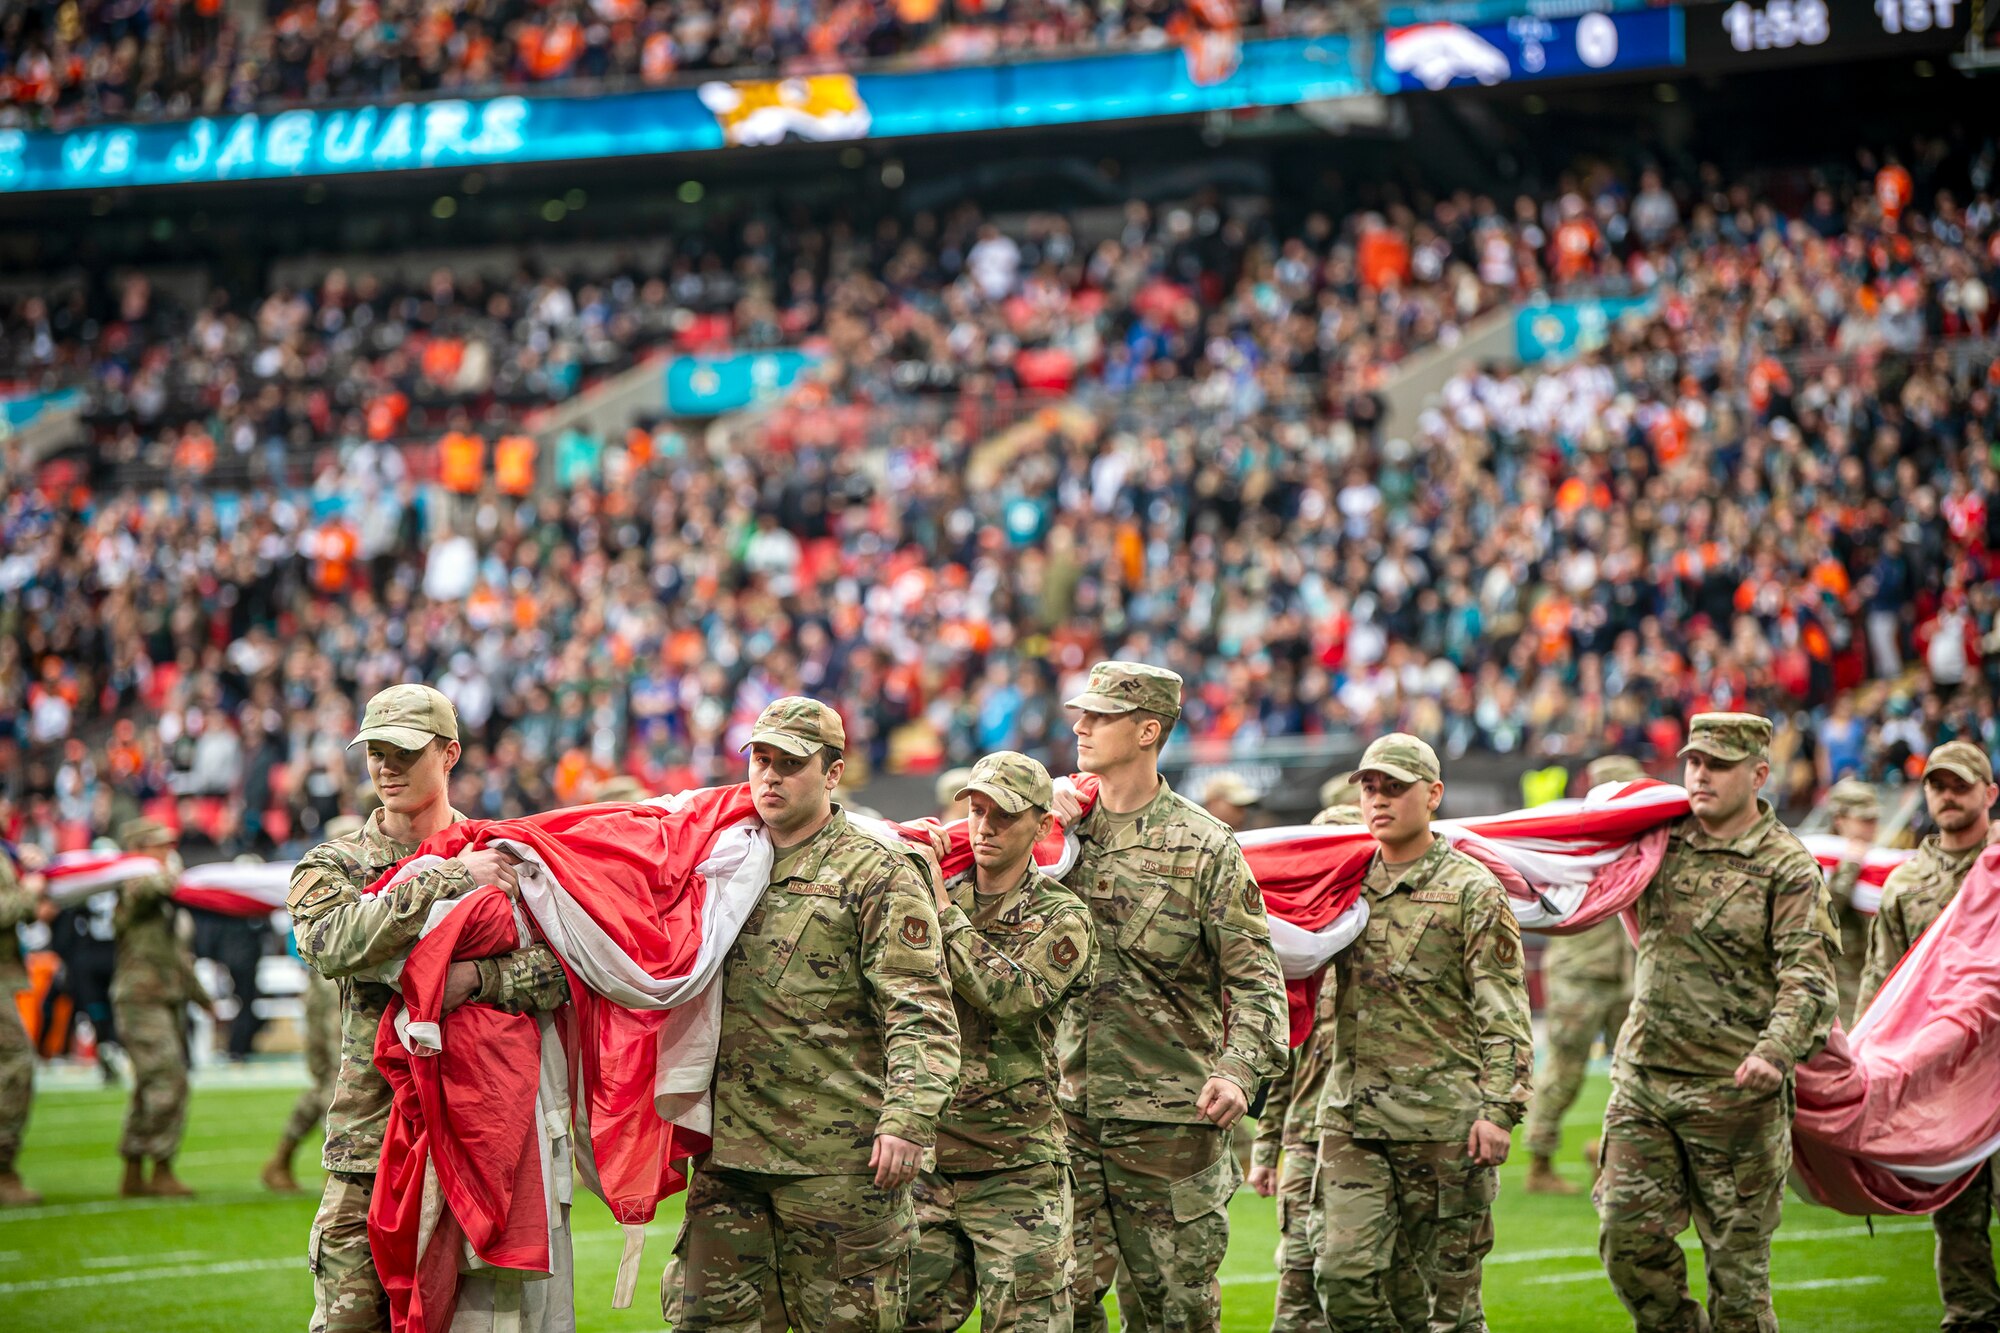 Airmen from the 501st Combat Support Wing carry an American flag off the field following the national anthem at Wembley Stadium, in London, England, Oct. 30, 2022. Approximately 70 uniformed personnel represented the U.S. Air Force and nation by unveiling an American flag during the pre-game ceremonies of the Jacksonville Jaguars and Denver Broncos NFL game. (U.S. Air Force photo by Staff Sgt. Eugene Oliver)